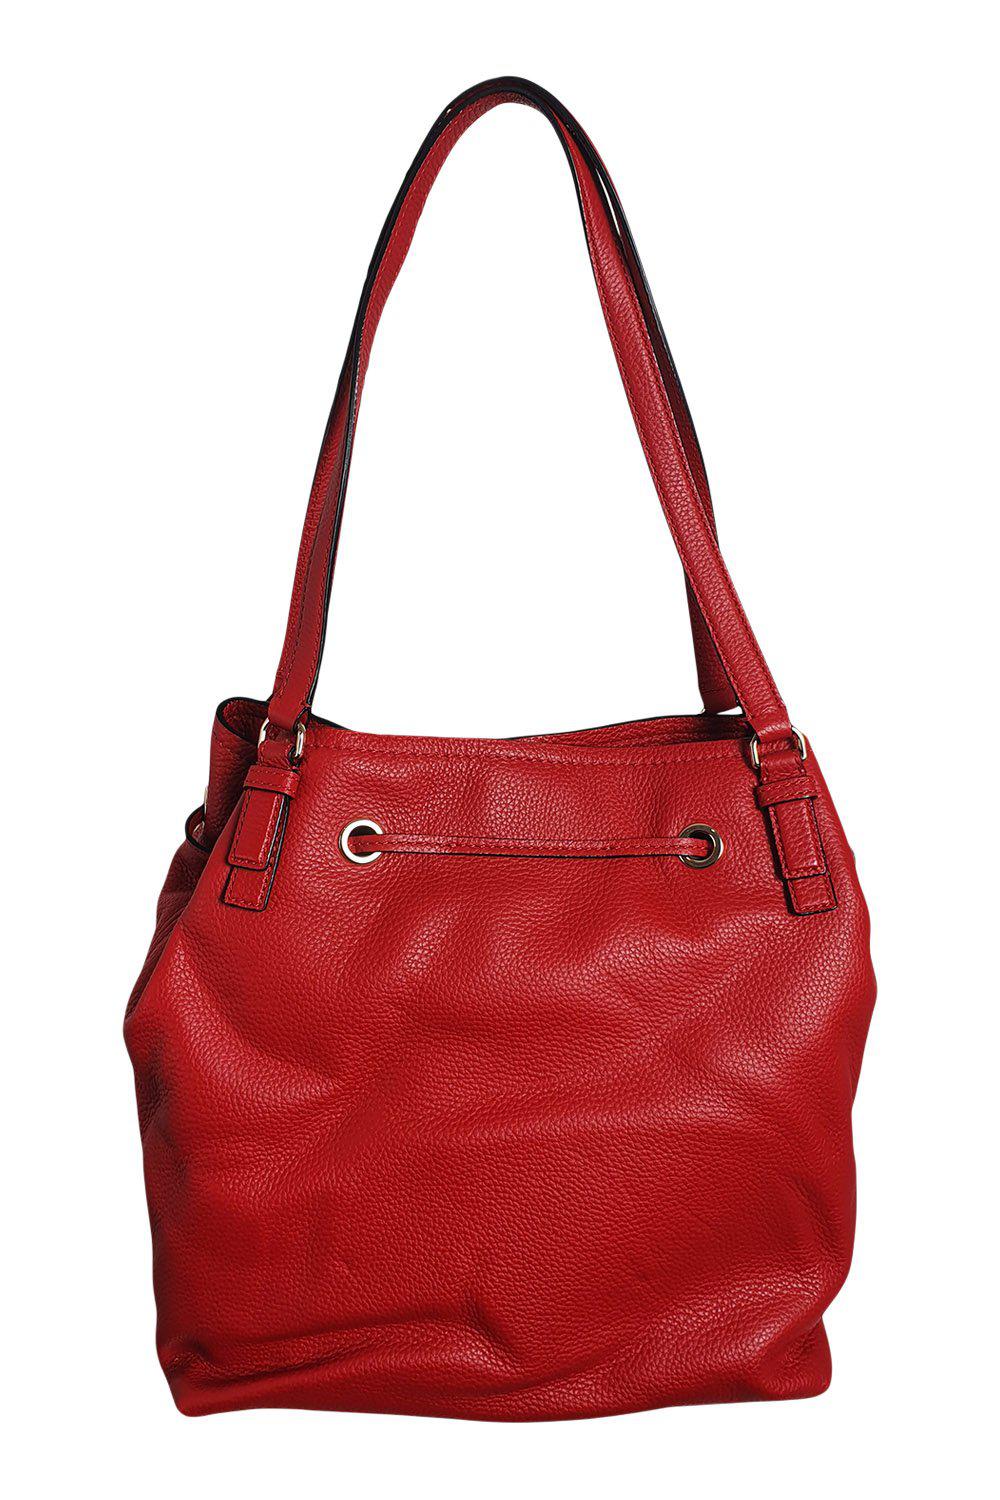 KATE SPADE Cherry Red Leather Medium Bucket Bag (M) – The Freperie